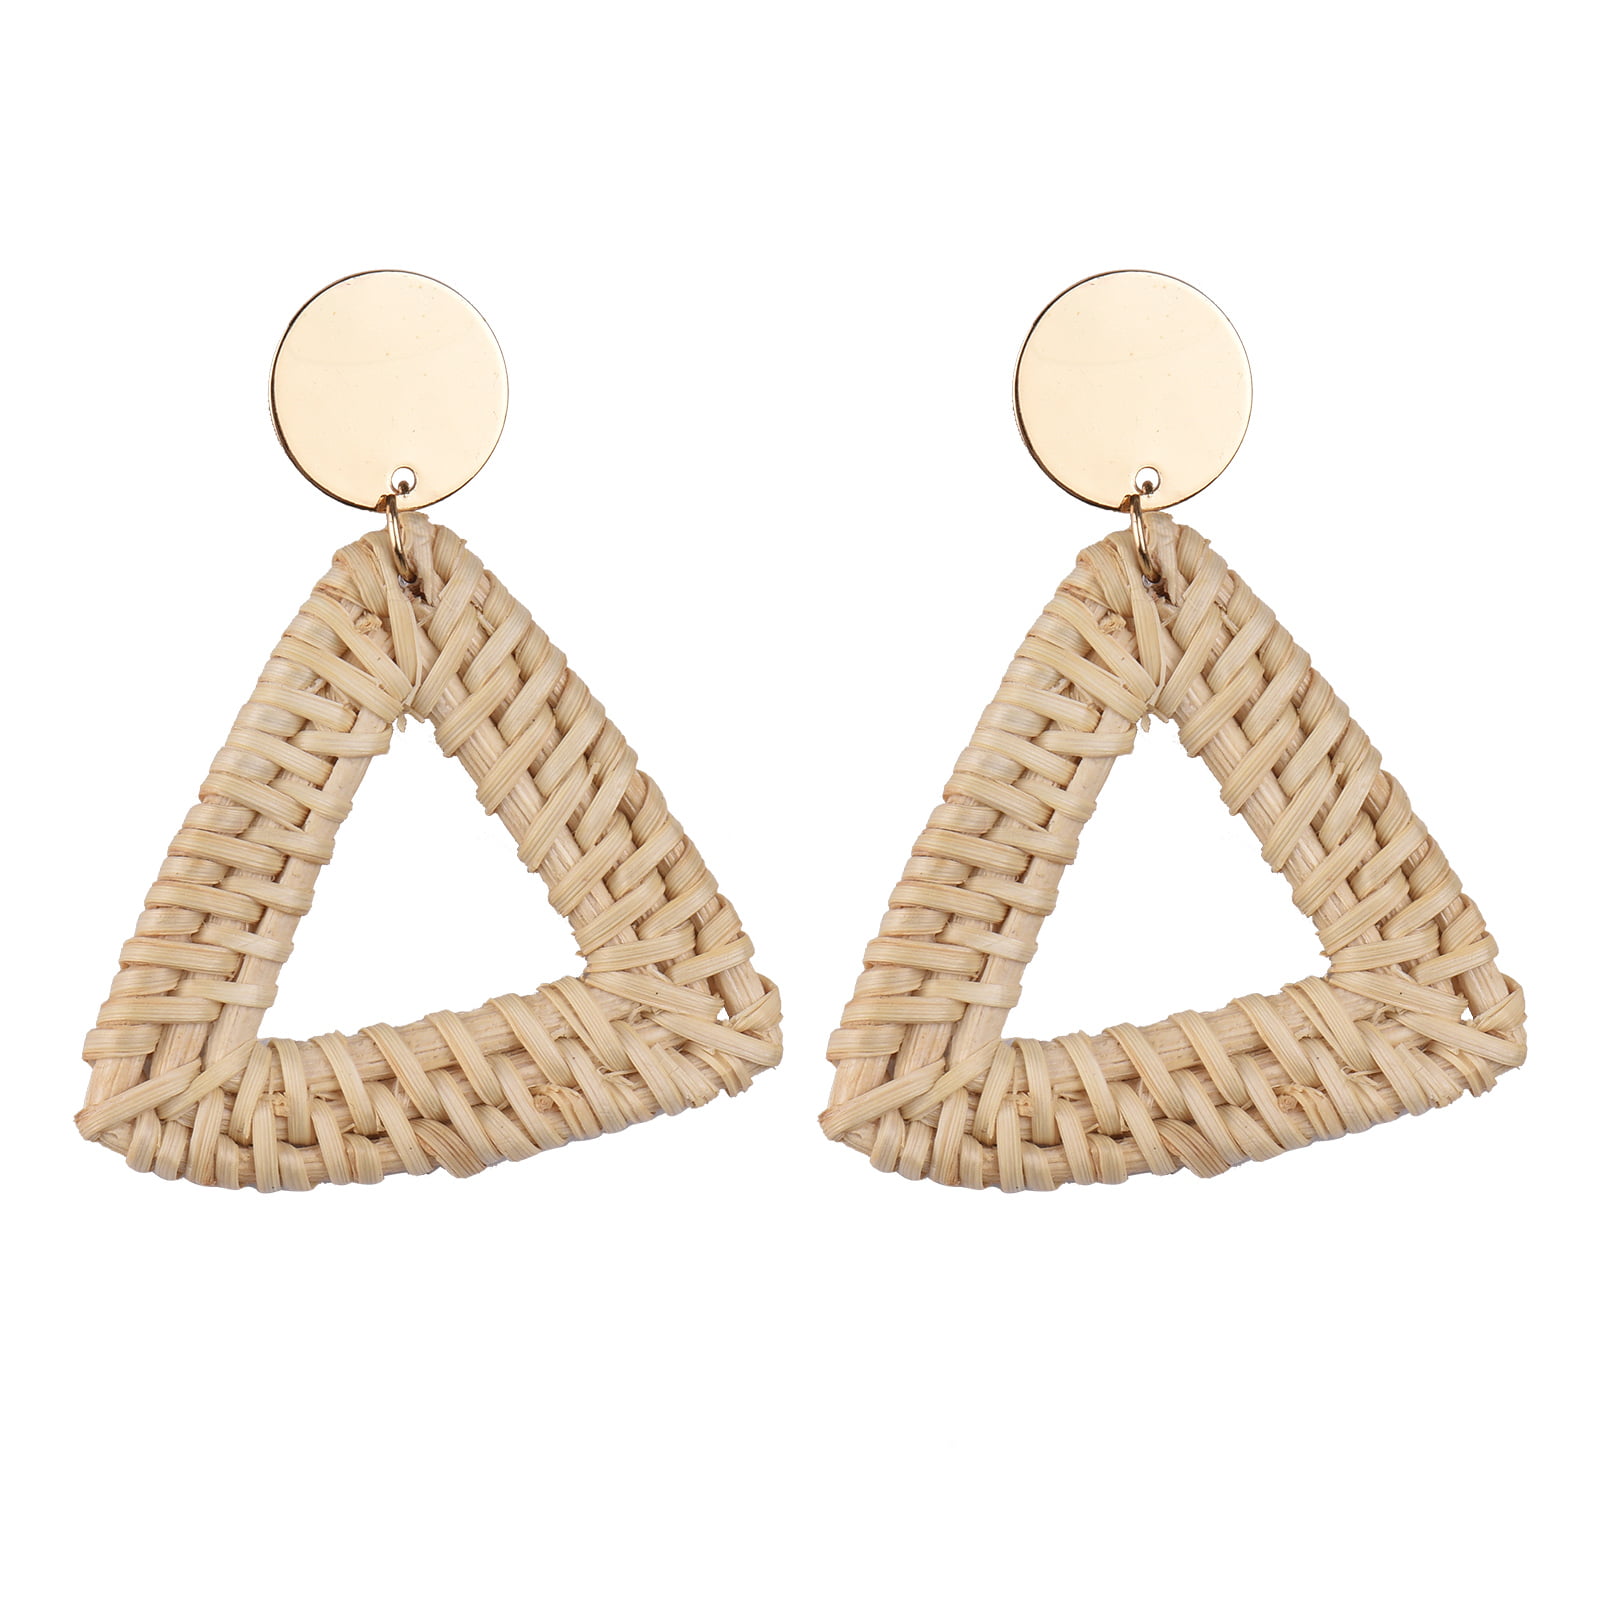 Hand Woven Teardrop Earrings With Decorative Charms